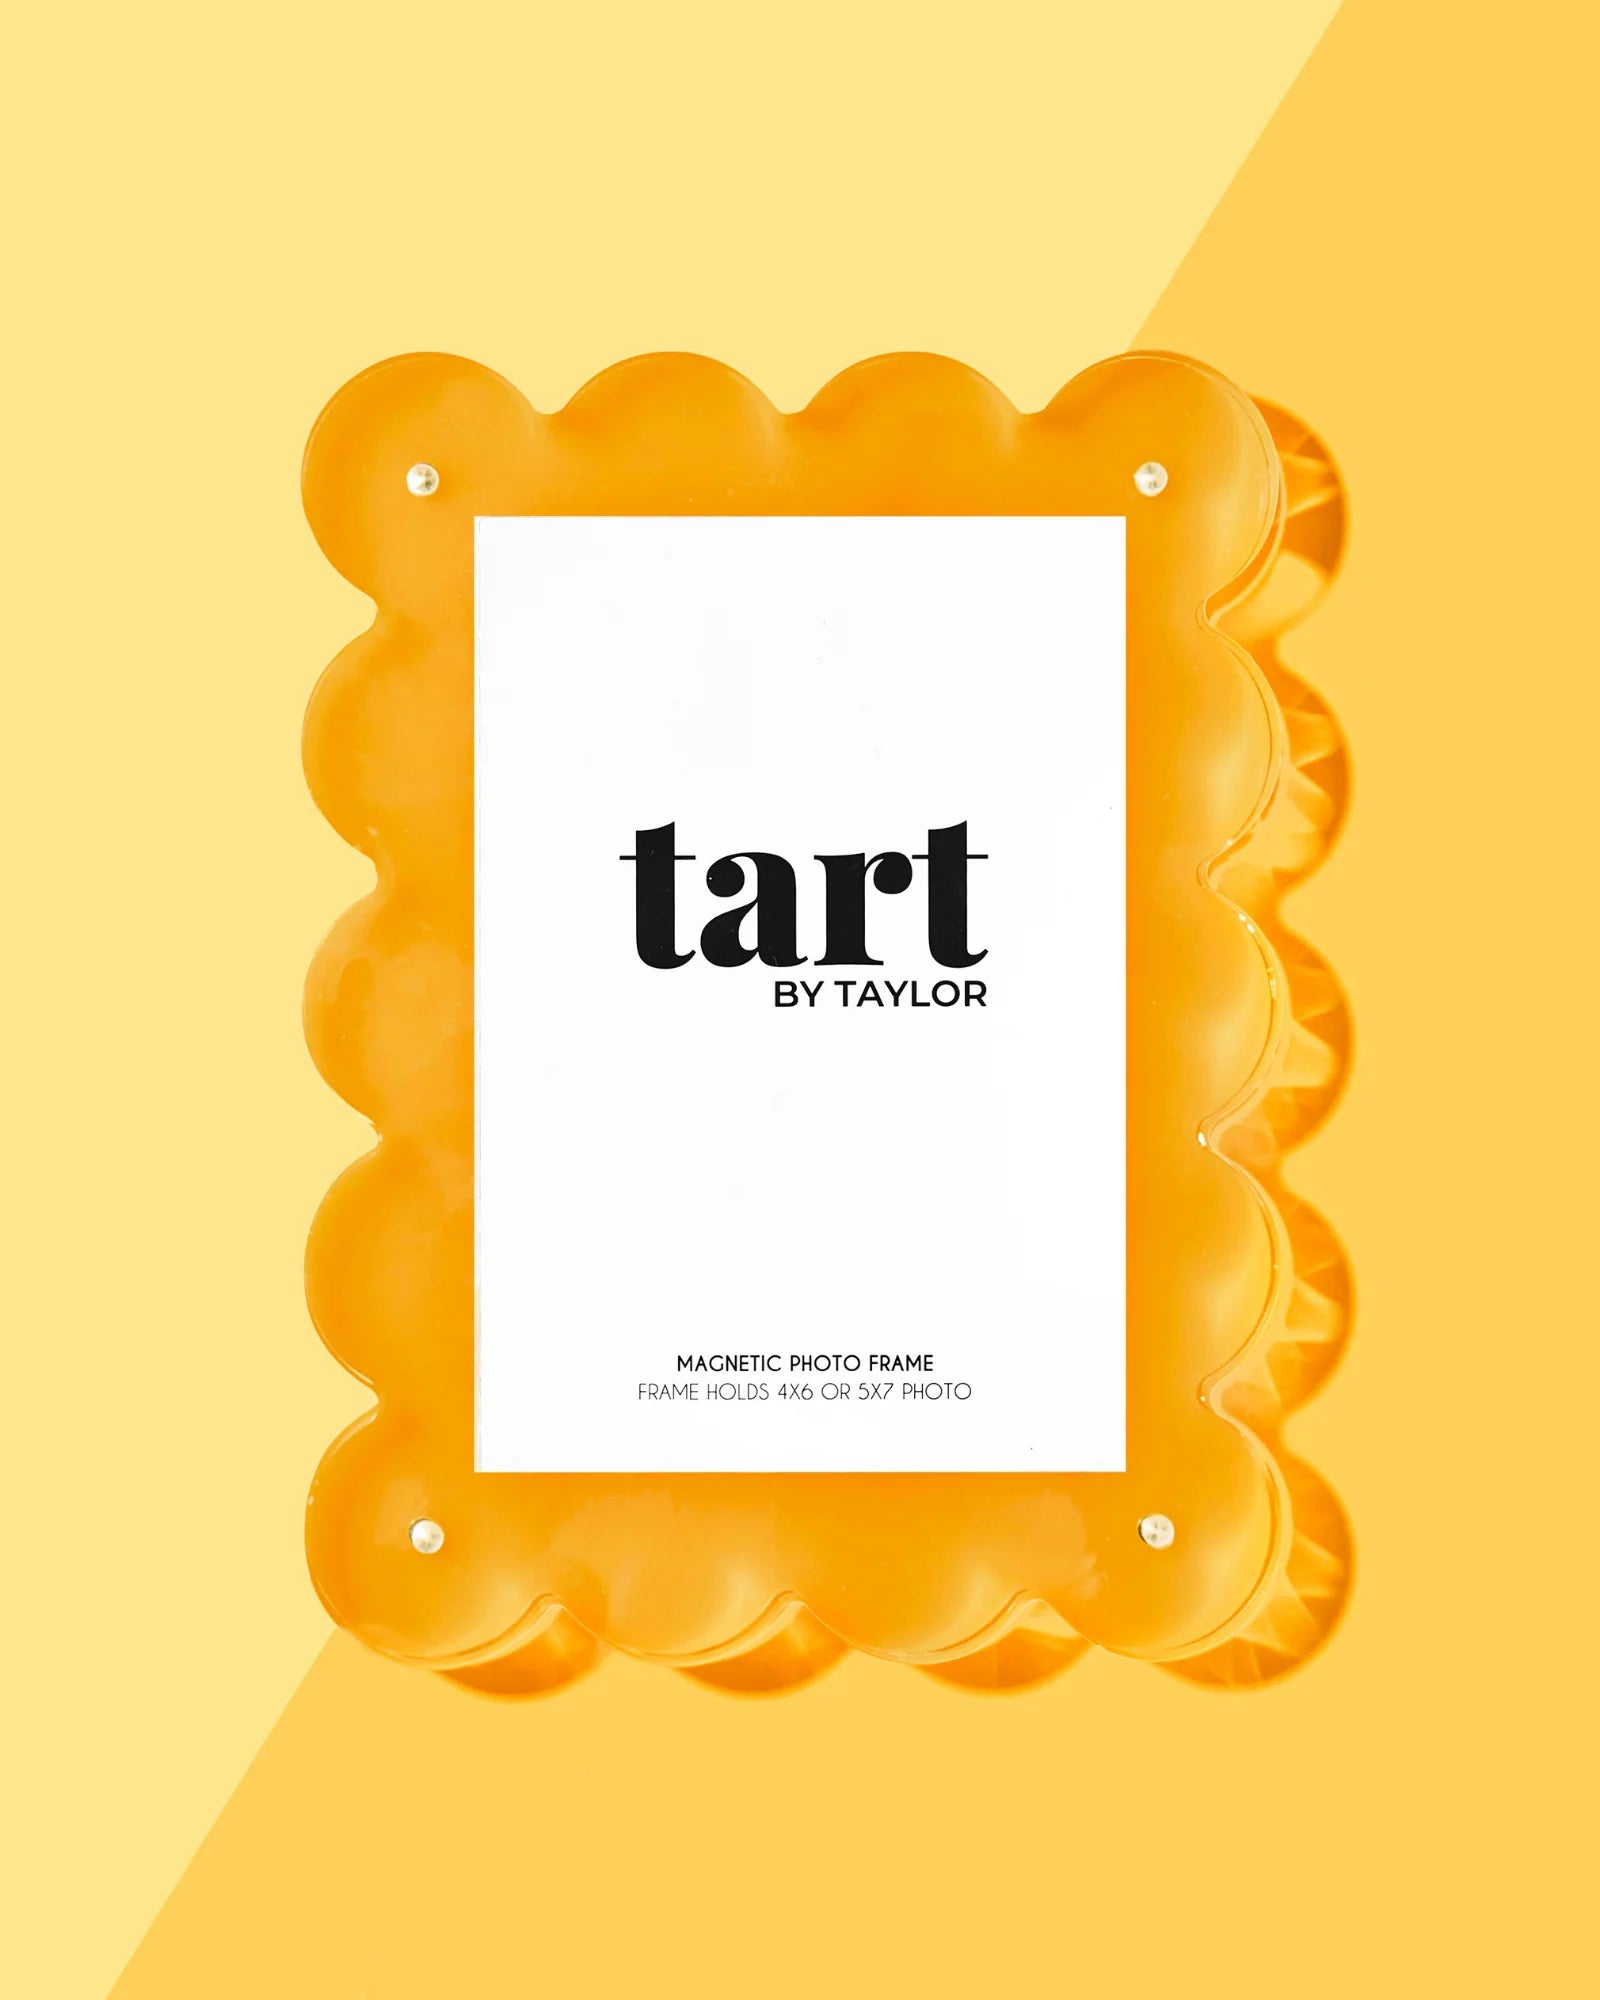 Tart by Taylor Acrylic Frames, Assorted Colors